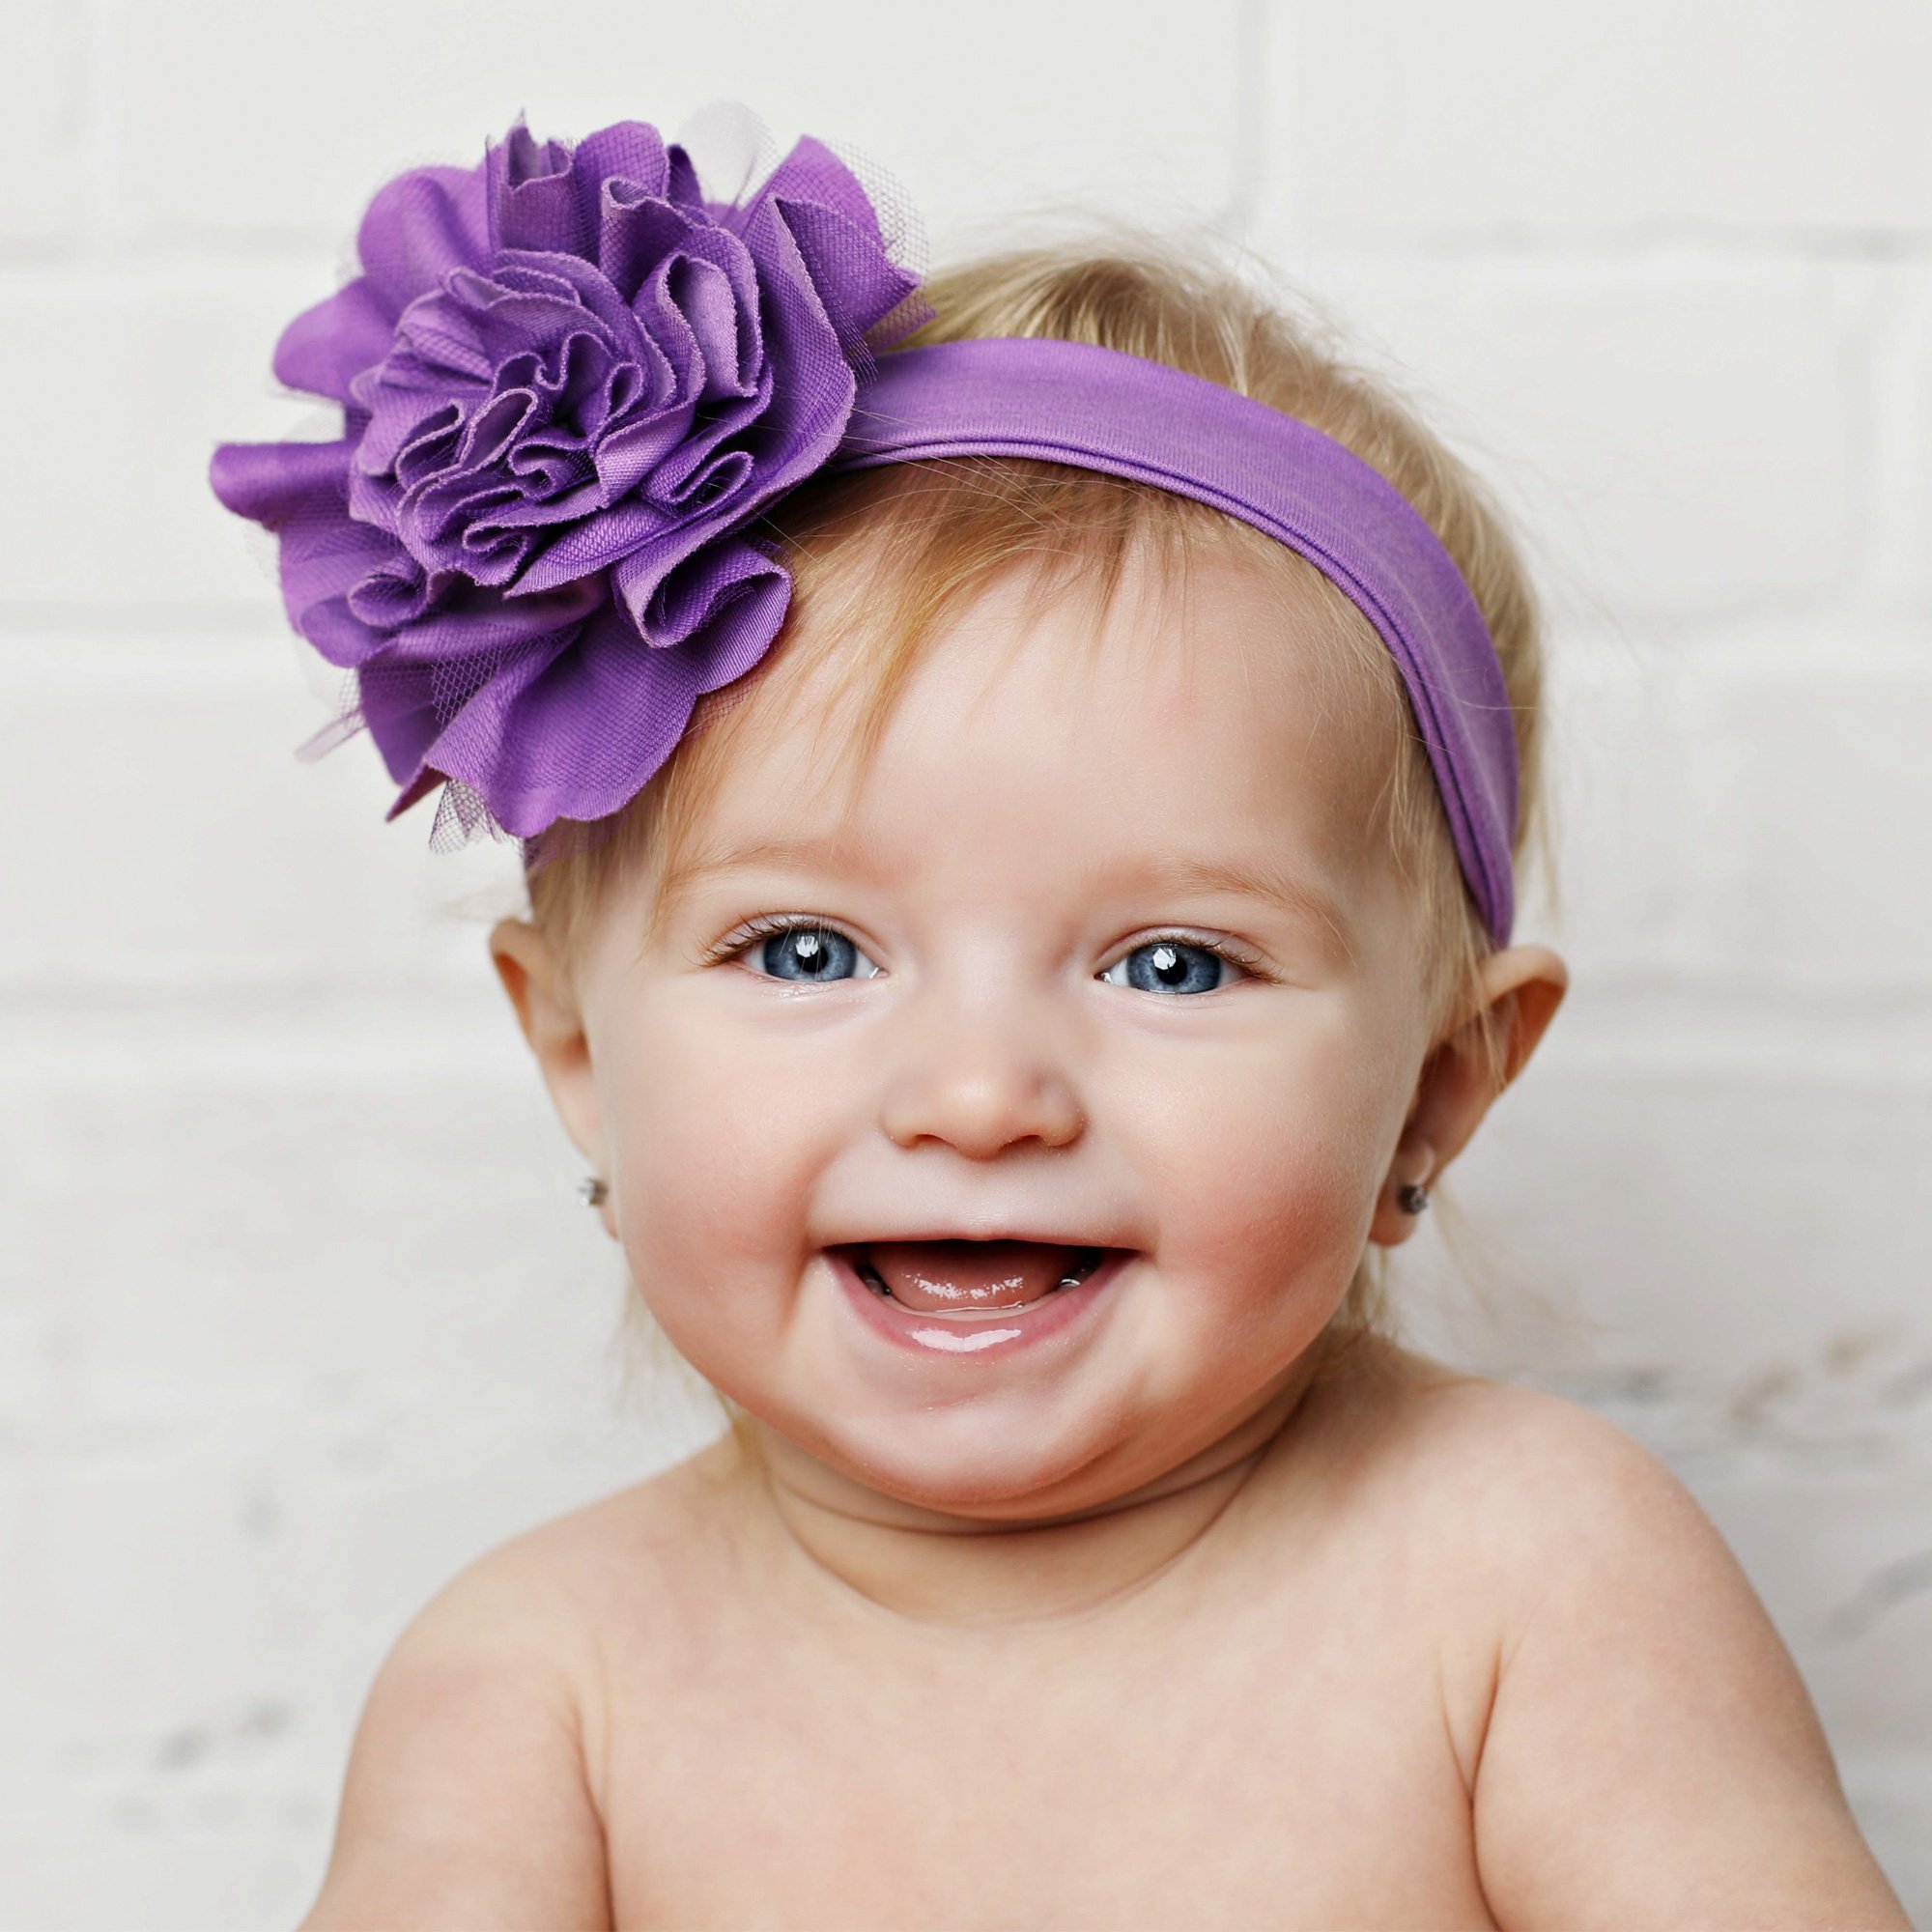 Lemon Loves Layette Lily Pad Headband for Baby Girls in Amethyst